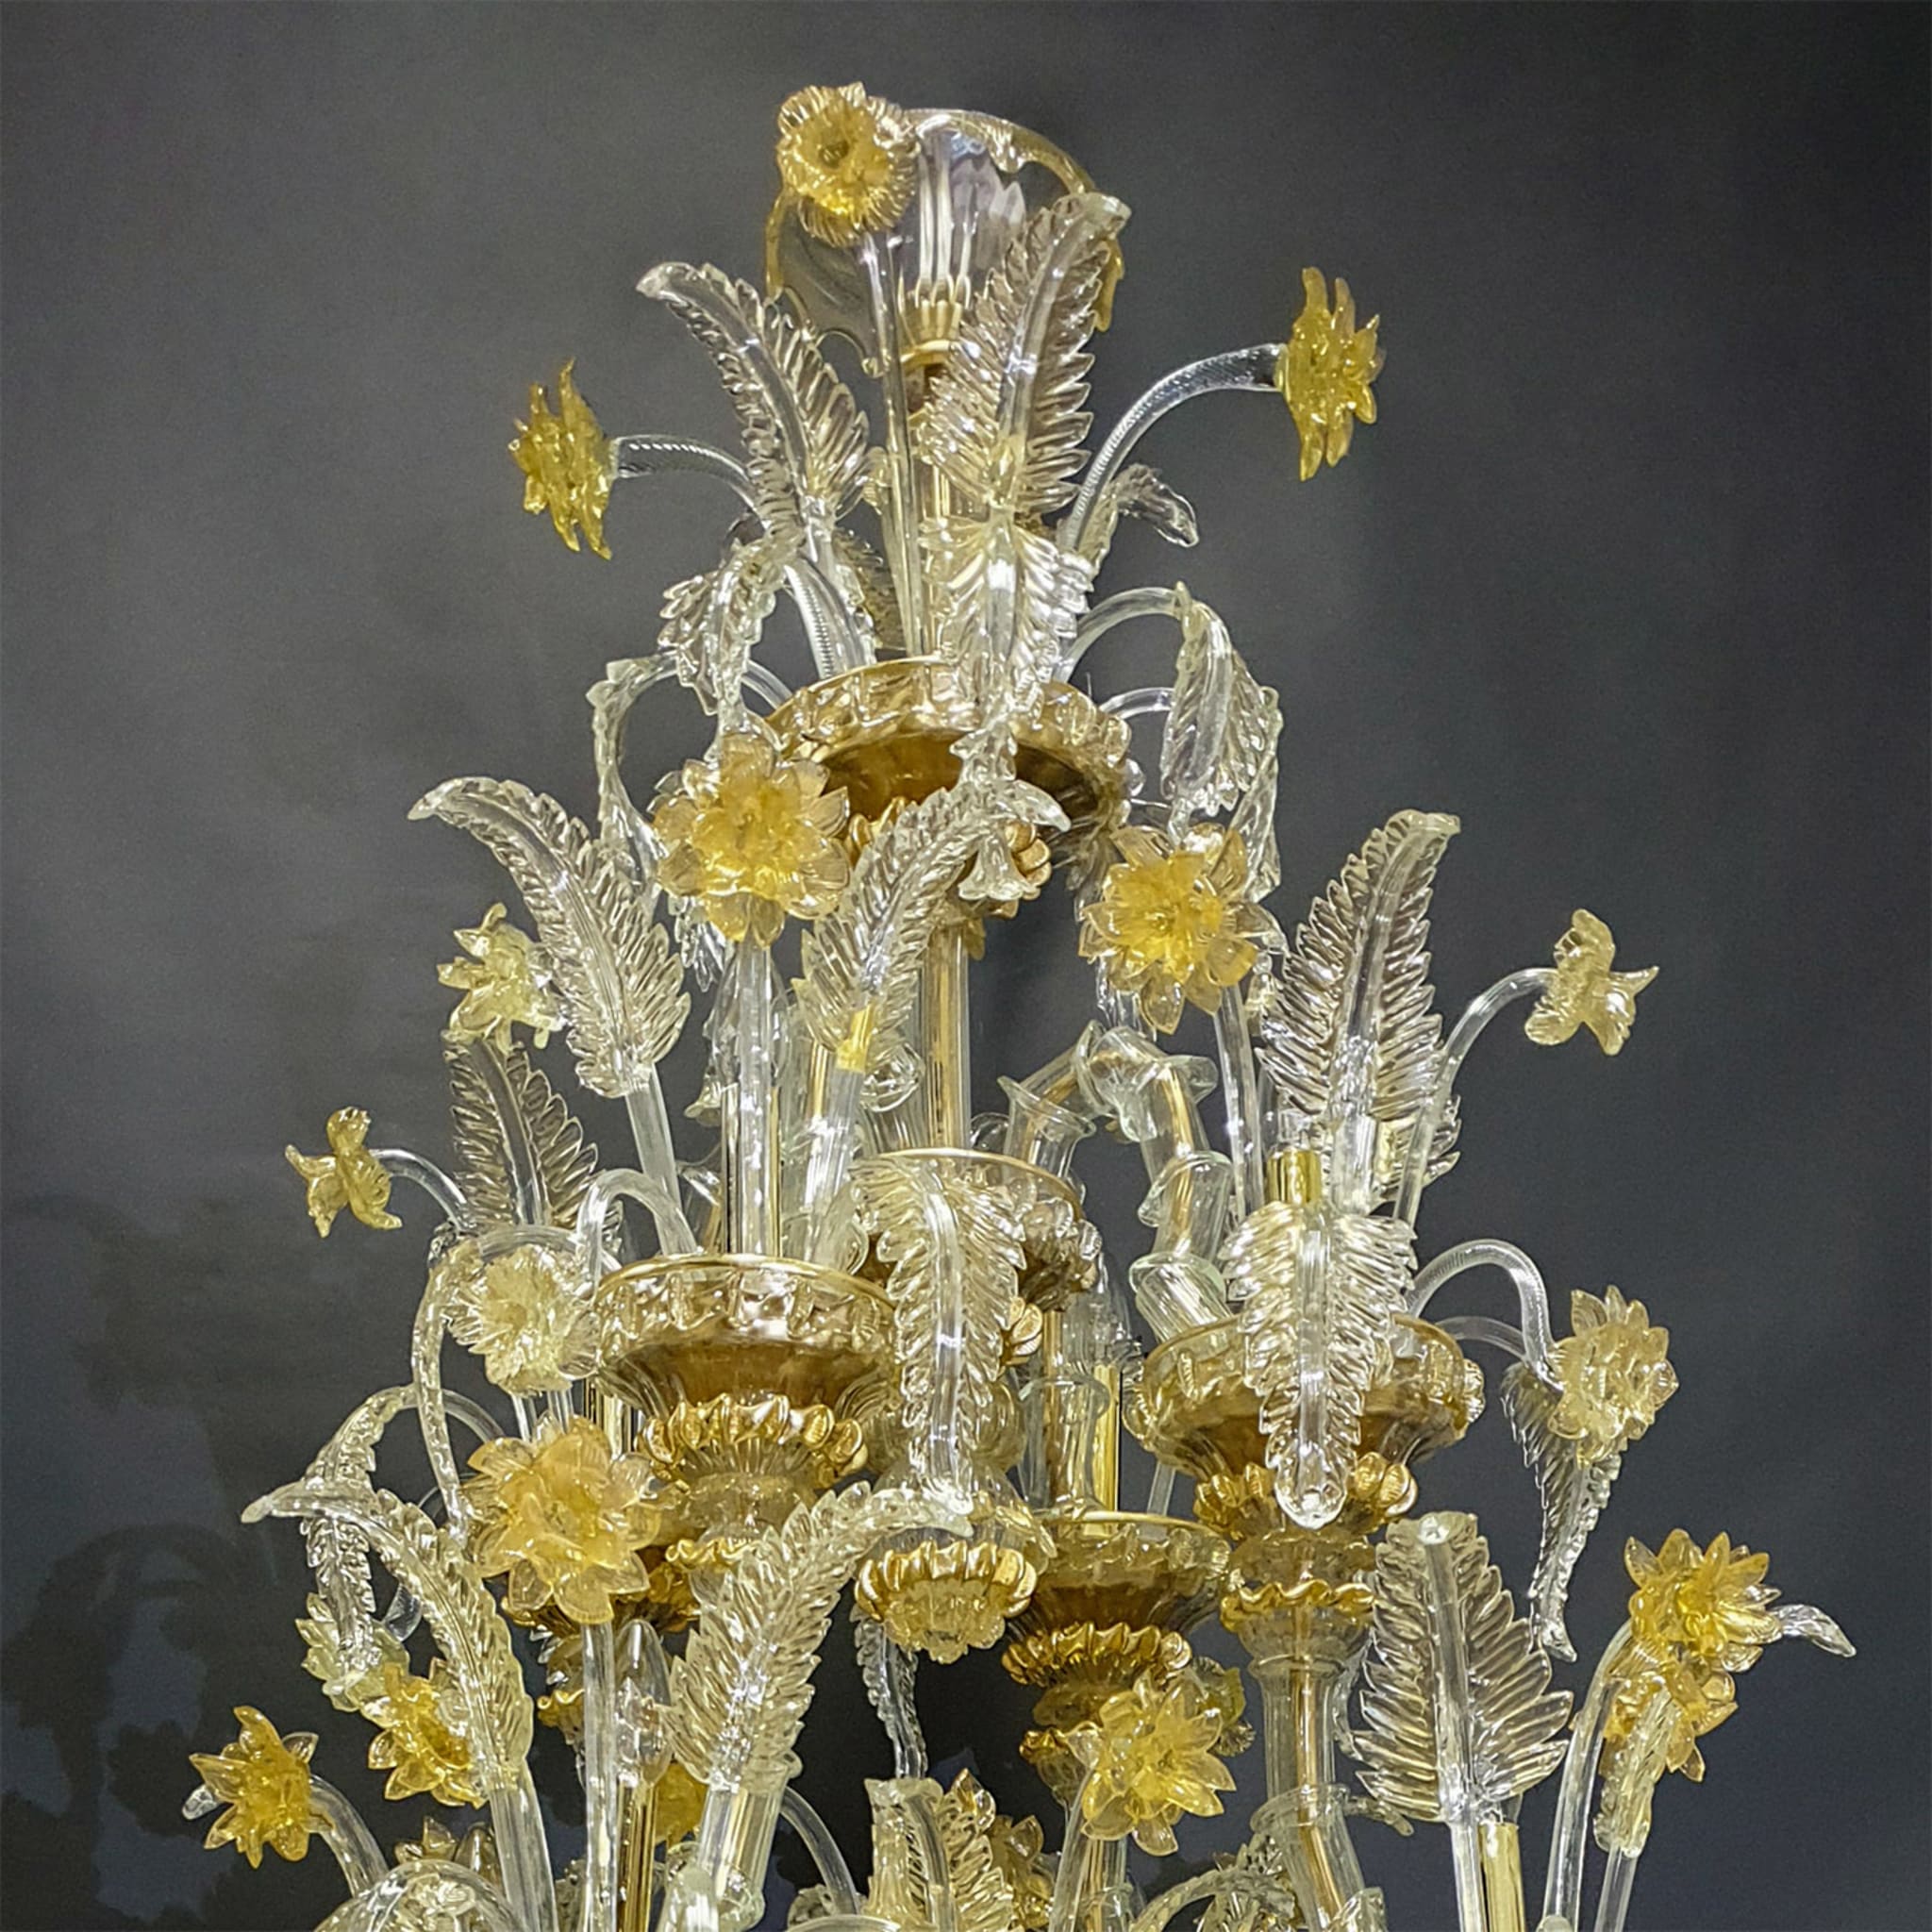 Rezzonico-style Gold and Crystal Chandelier #3 - Alternative view 1